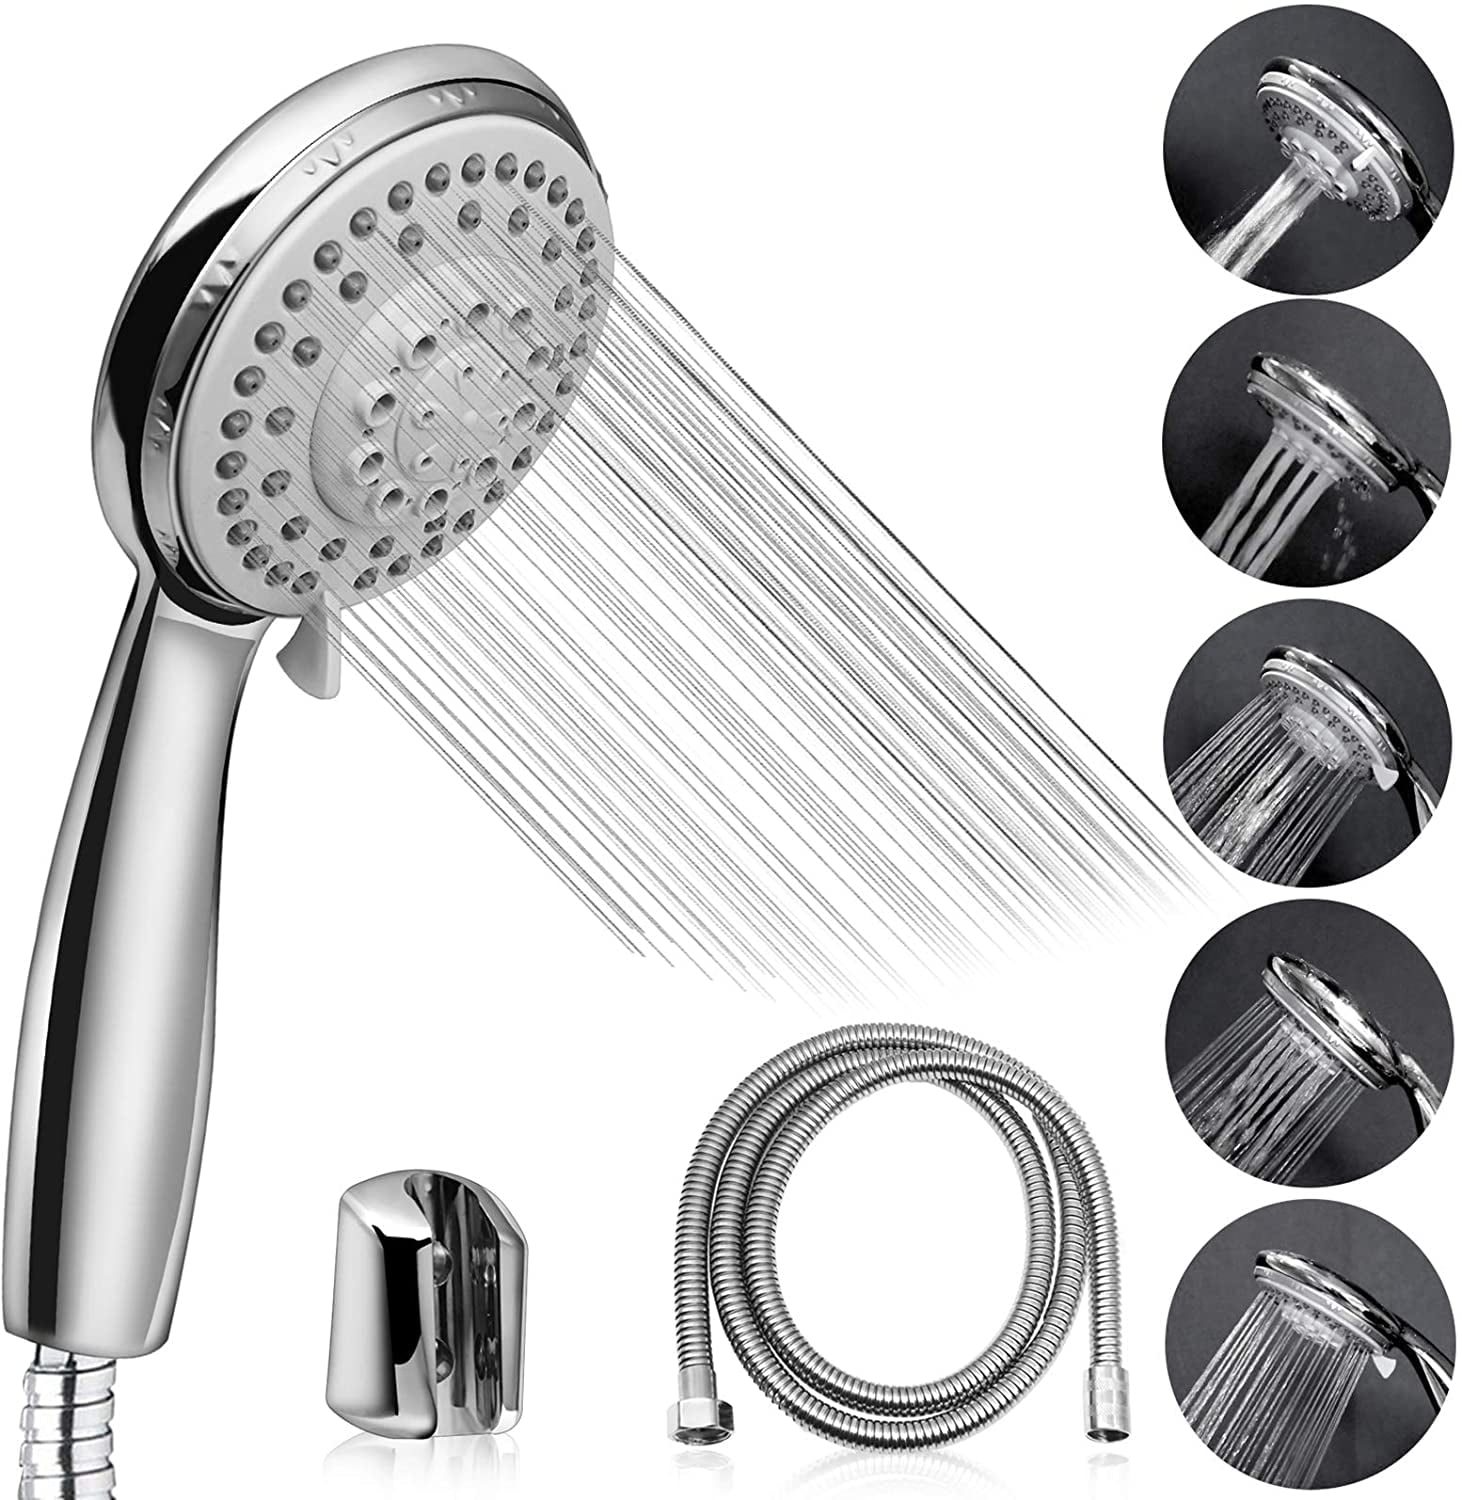 High Pressure Handheld Shower Head With a Long Hose Spray For Hand Held Rainfall 